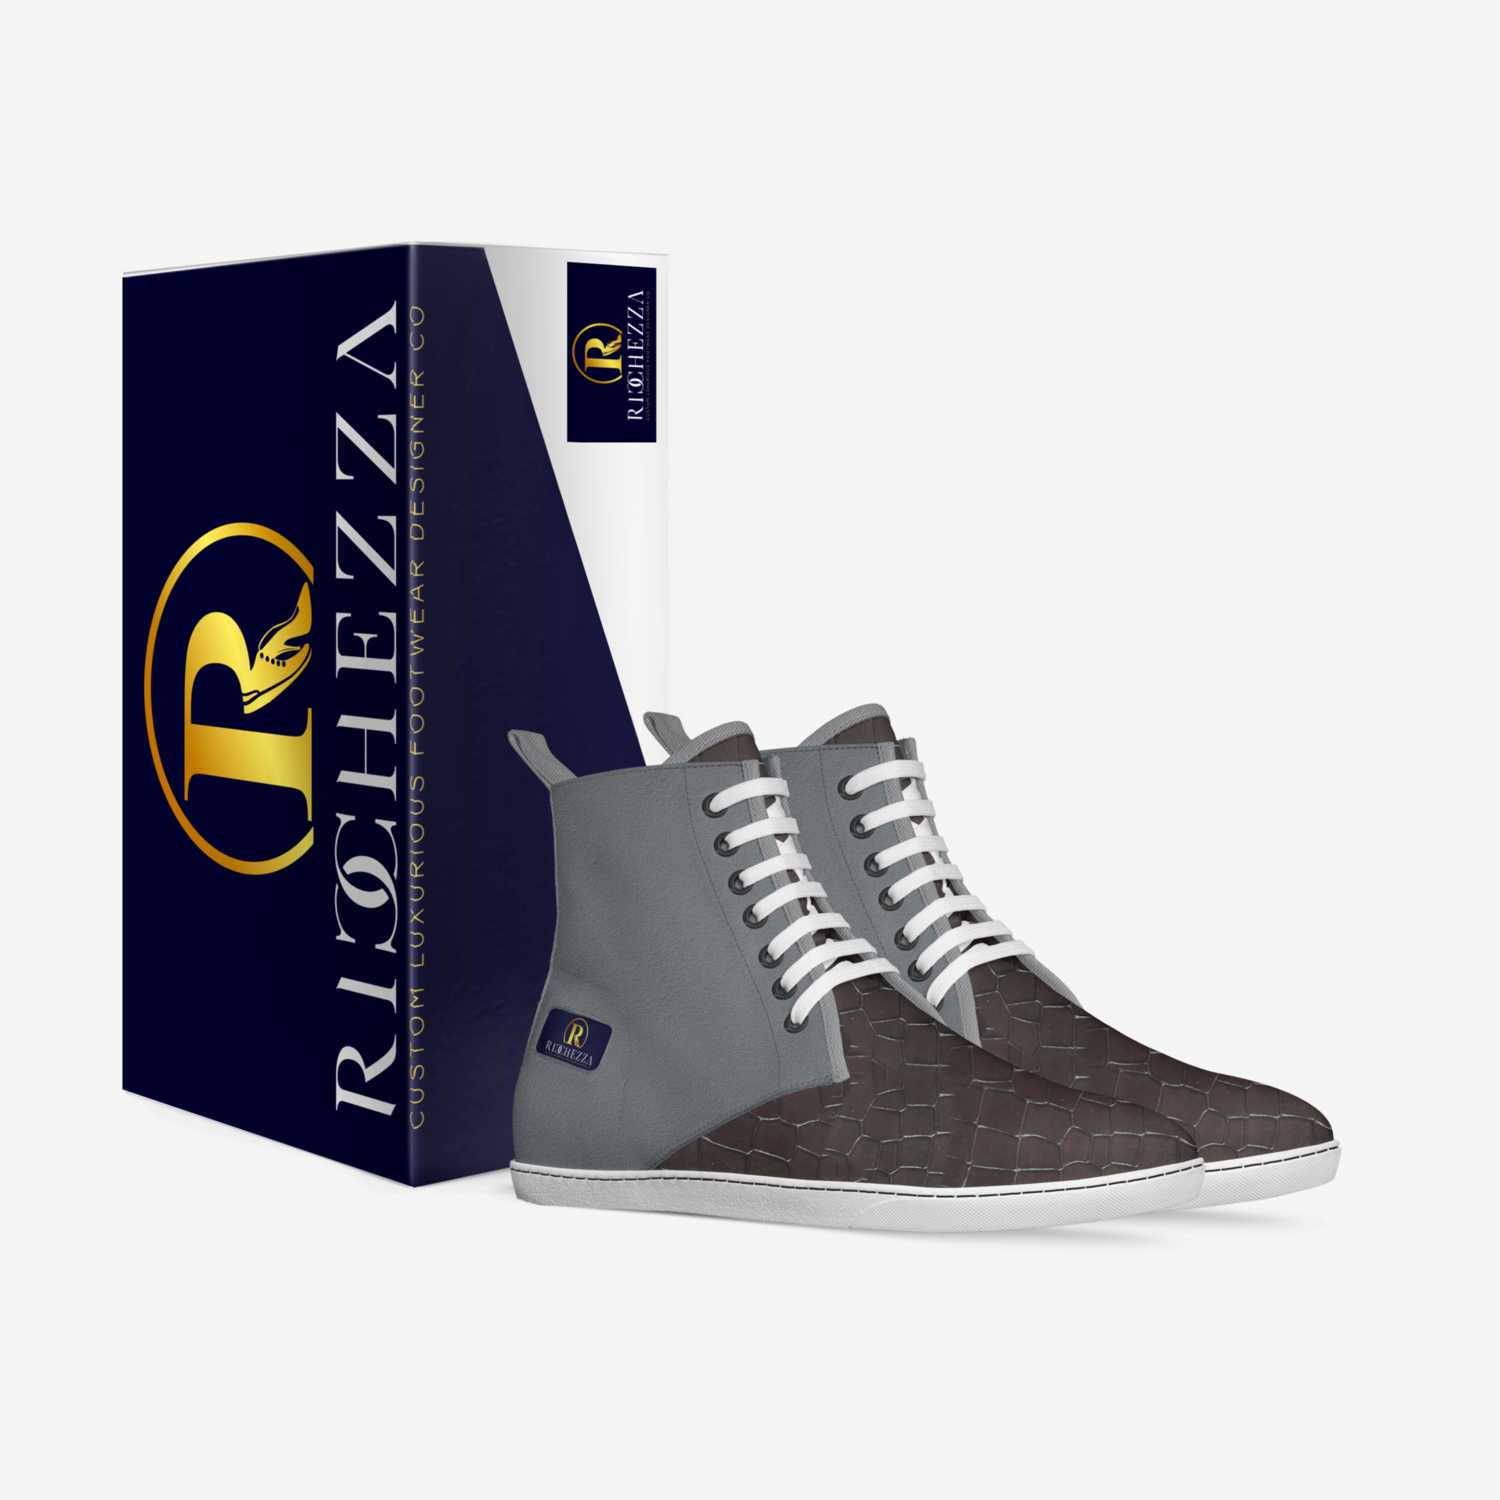 1596 custom made in Italy shoes by Ricchezza Custom Footwear Designer Co. | Box view